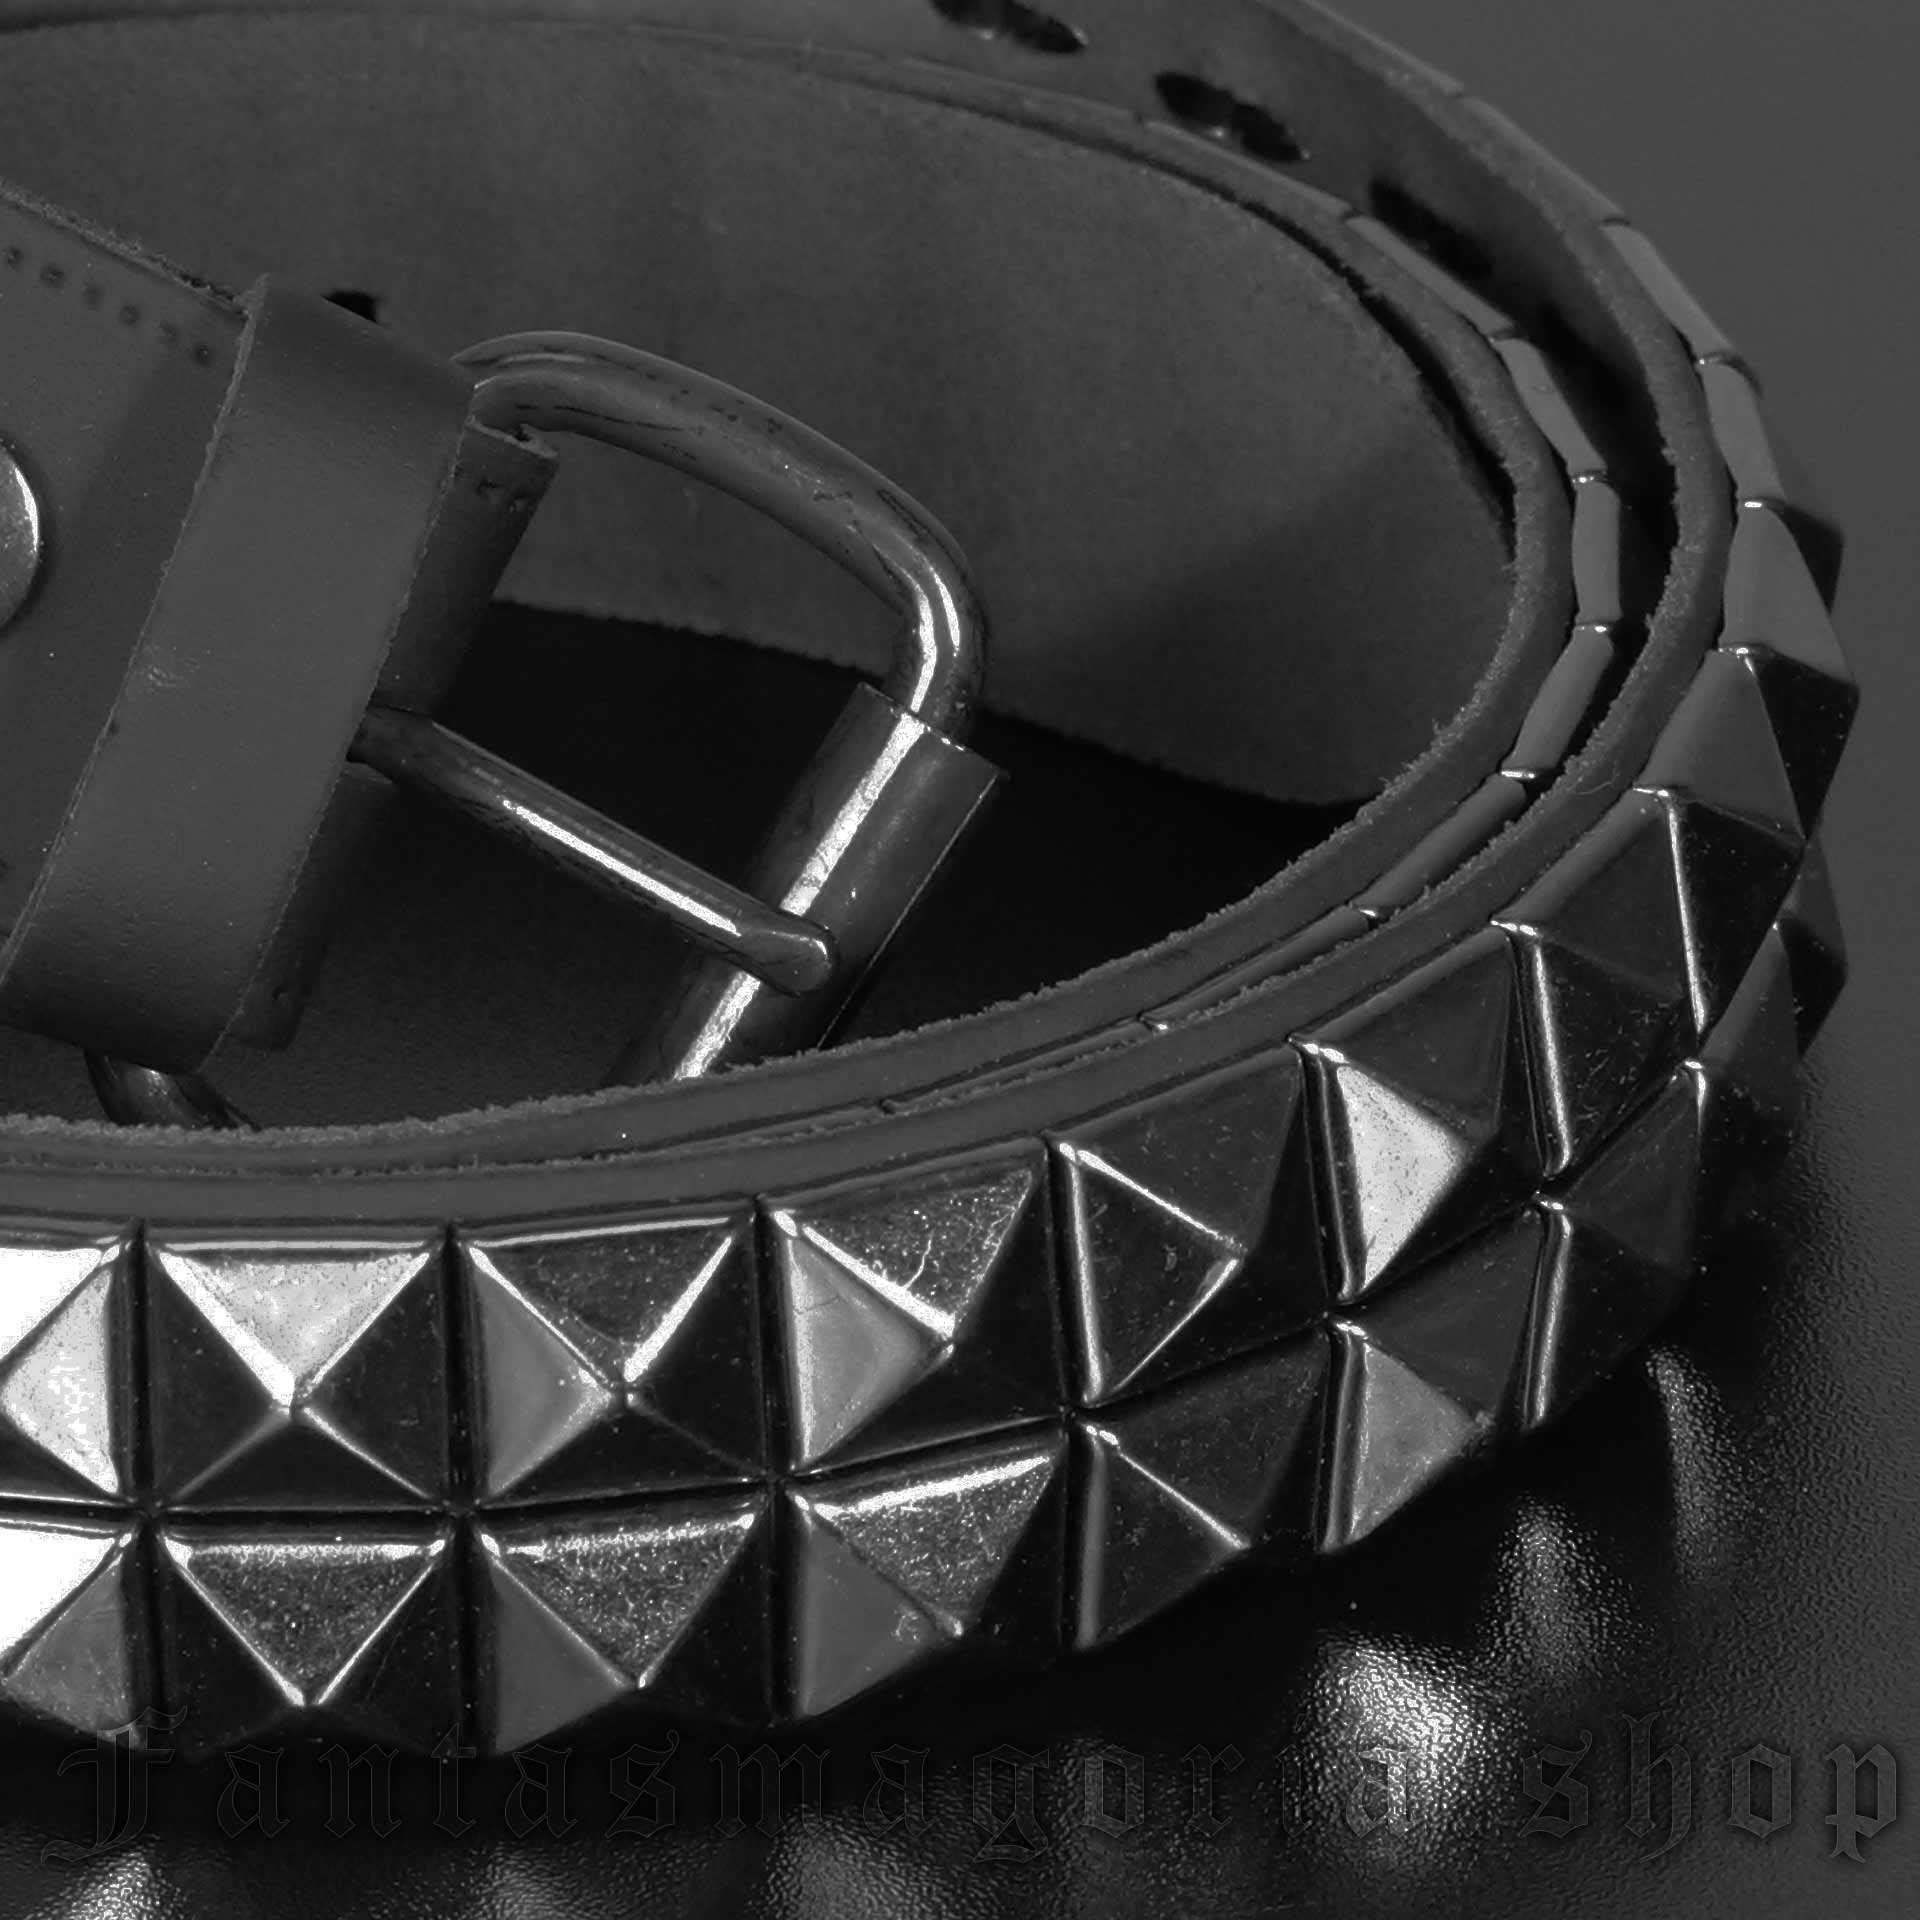 Black Pyramid Studs Leather Belt by NoName brand